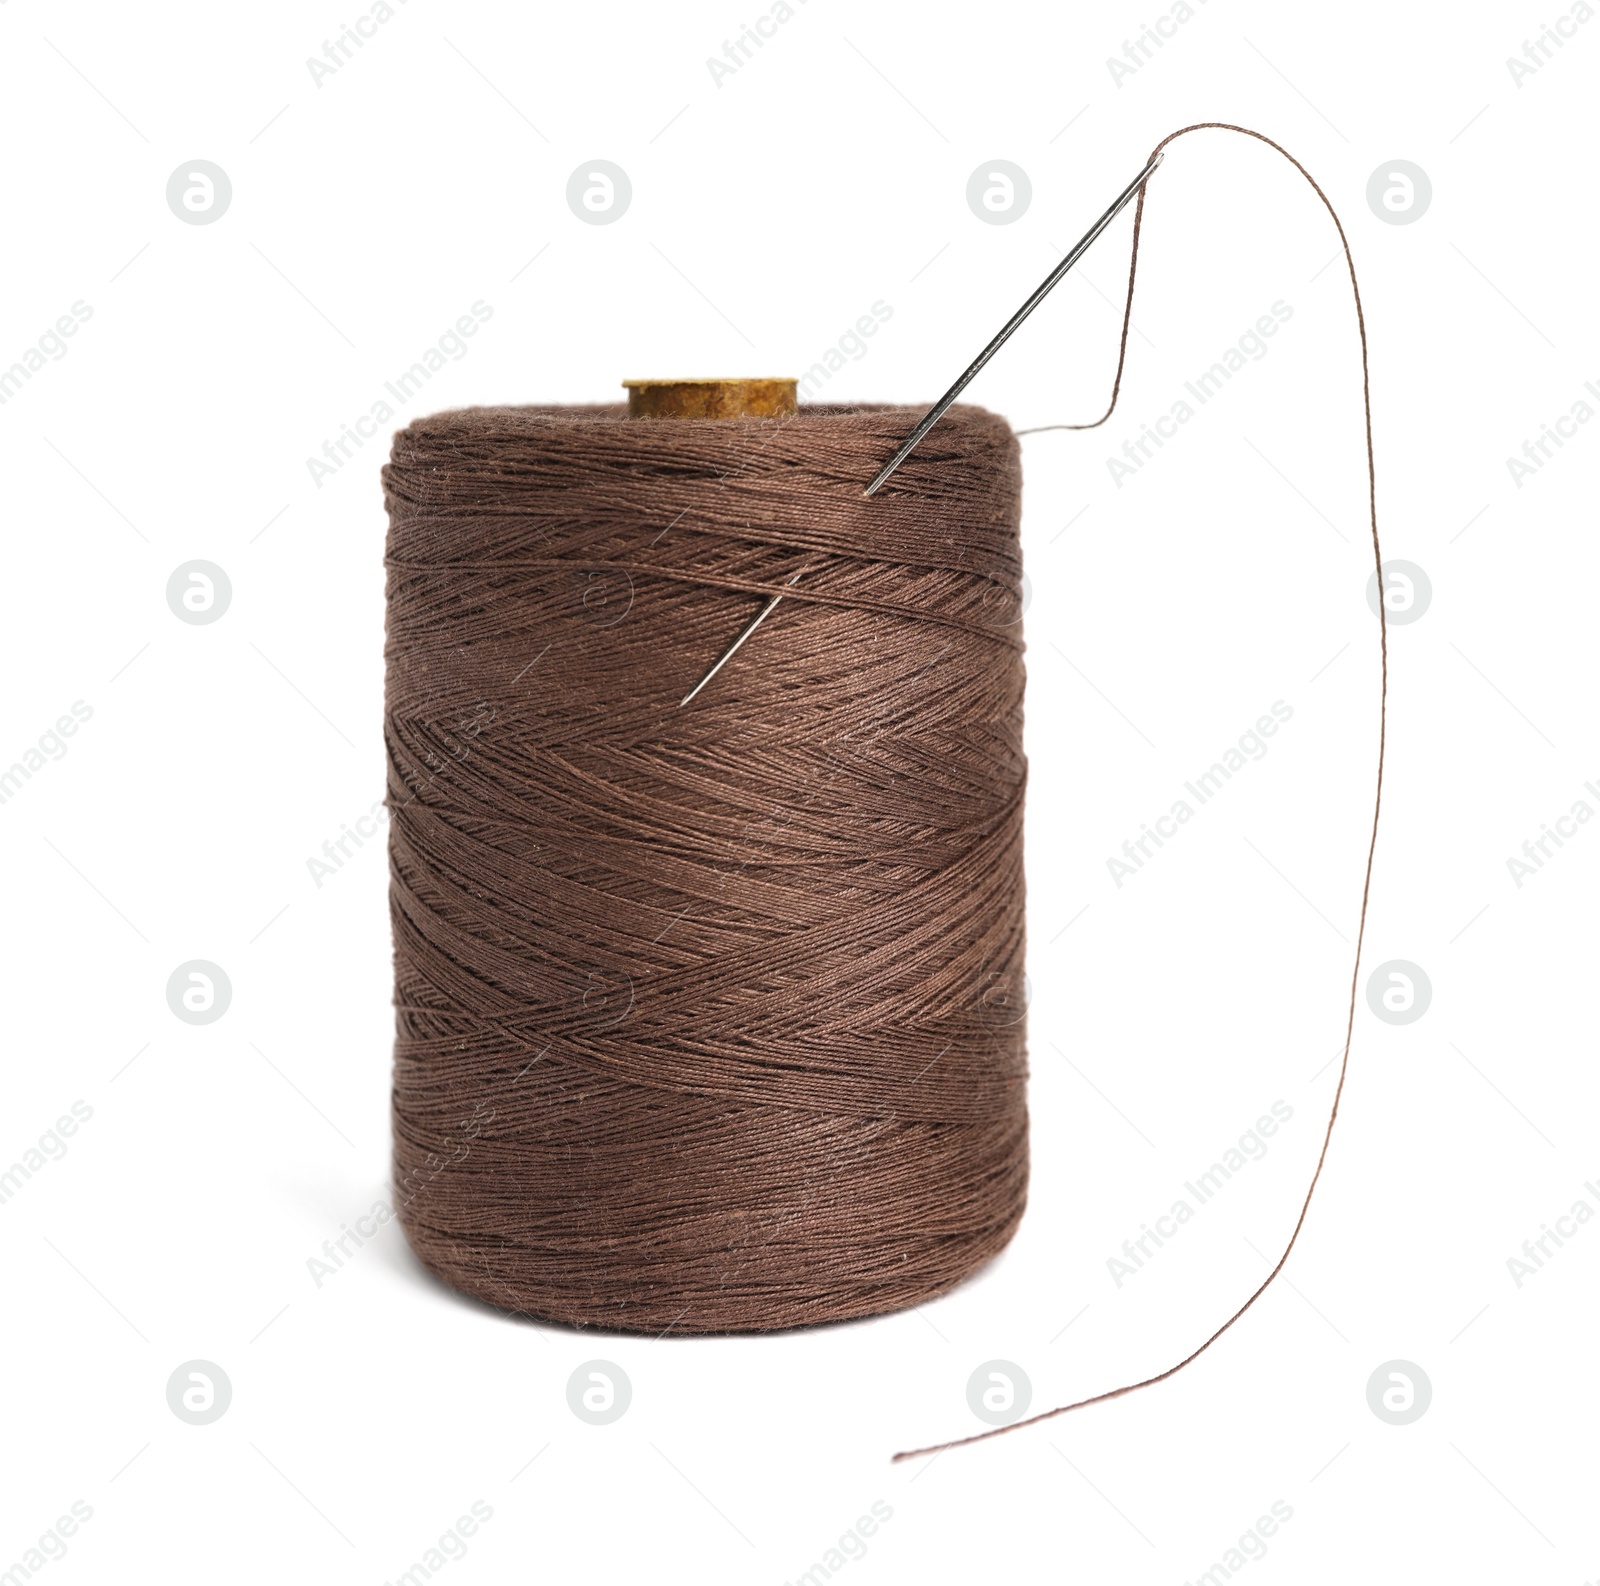 Photo of Brown sewing thread with needle on white background